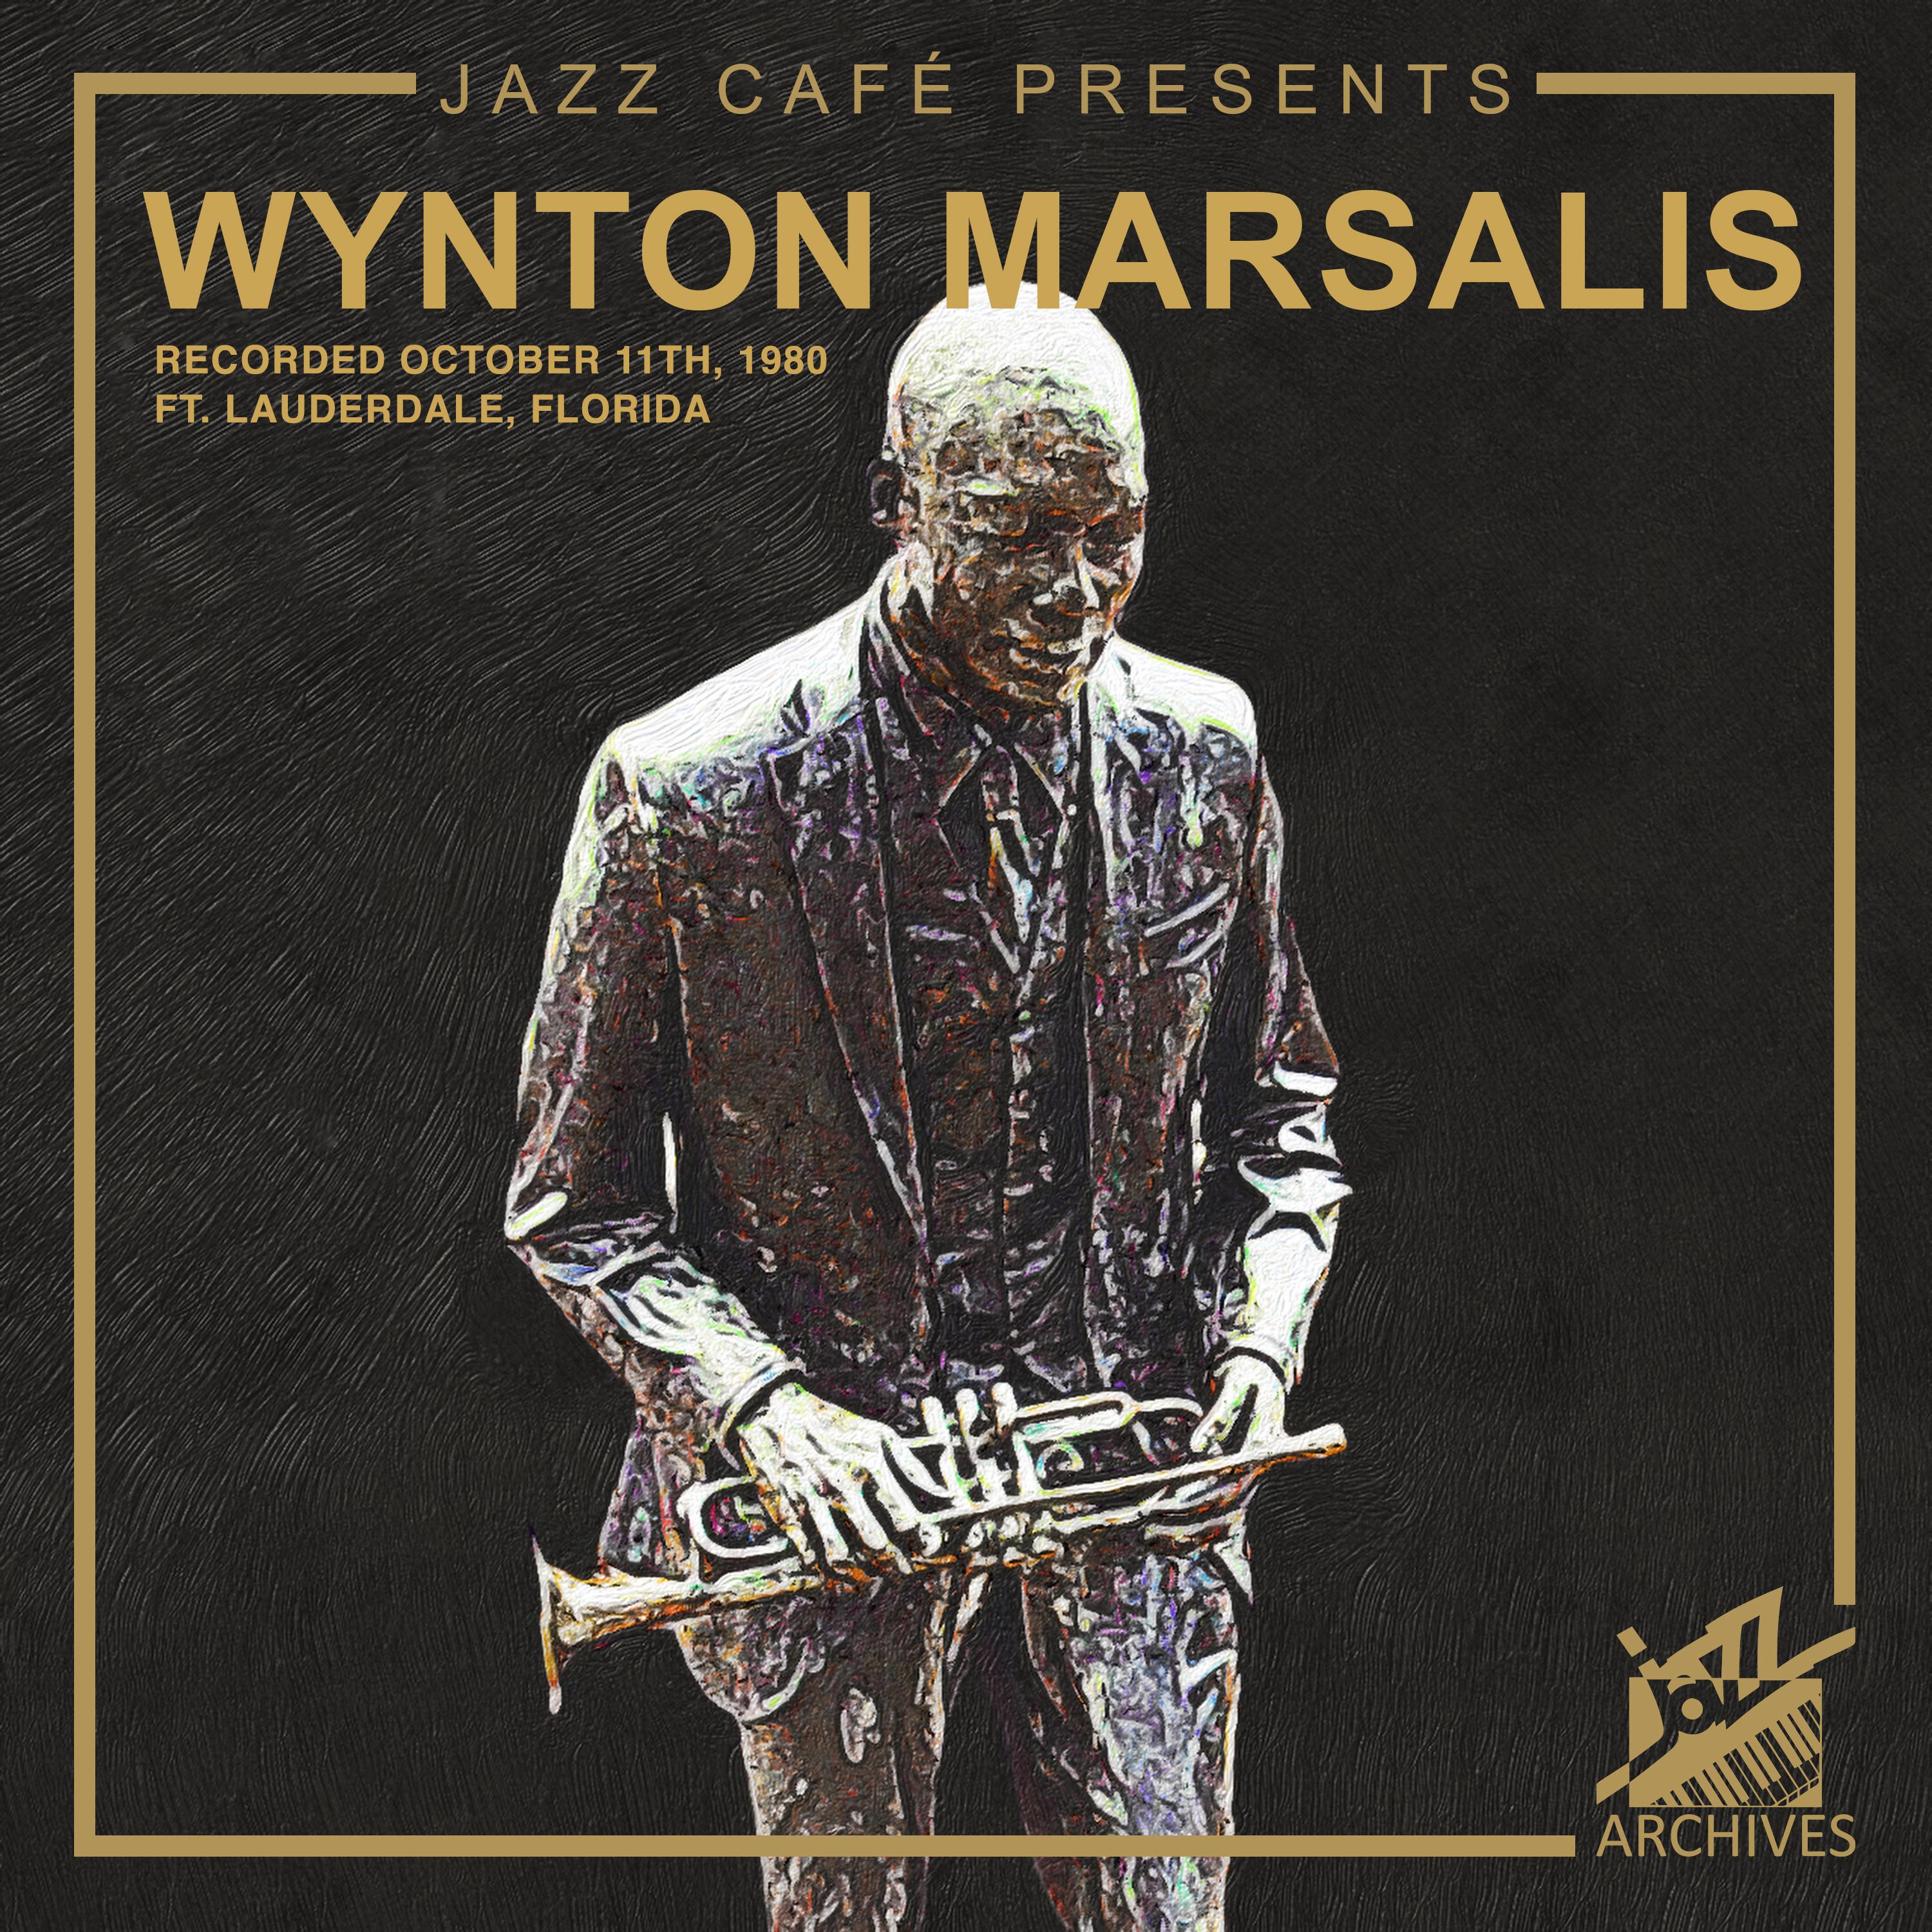 Jazz Cafe Presents: Wynton Marsalis Recorded October 11th, 1980, Ft. Lauderdale, Florida